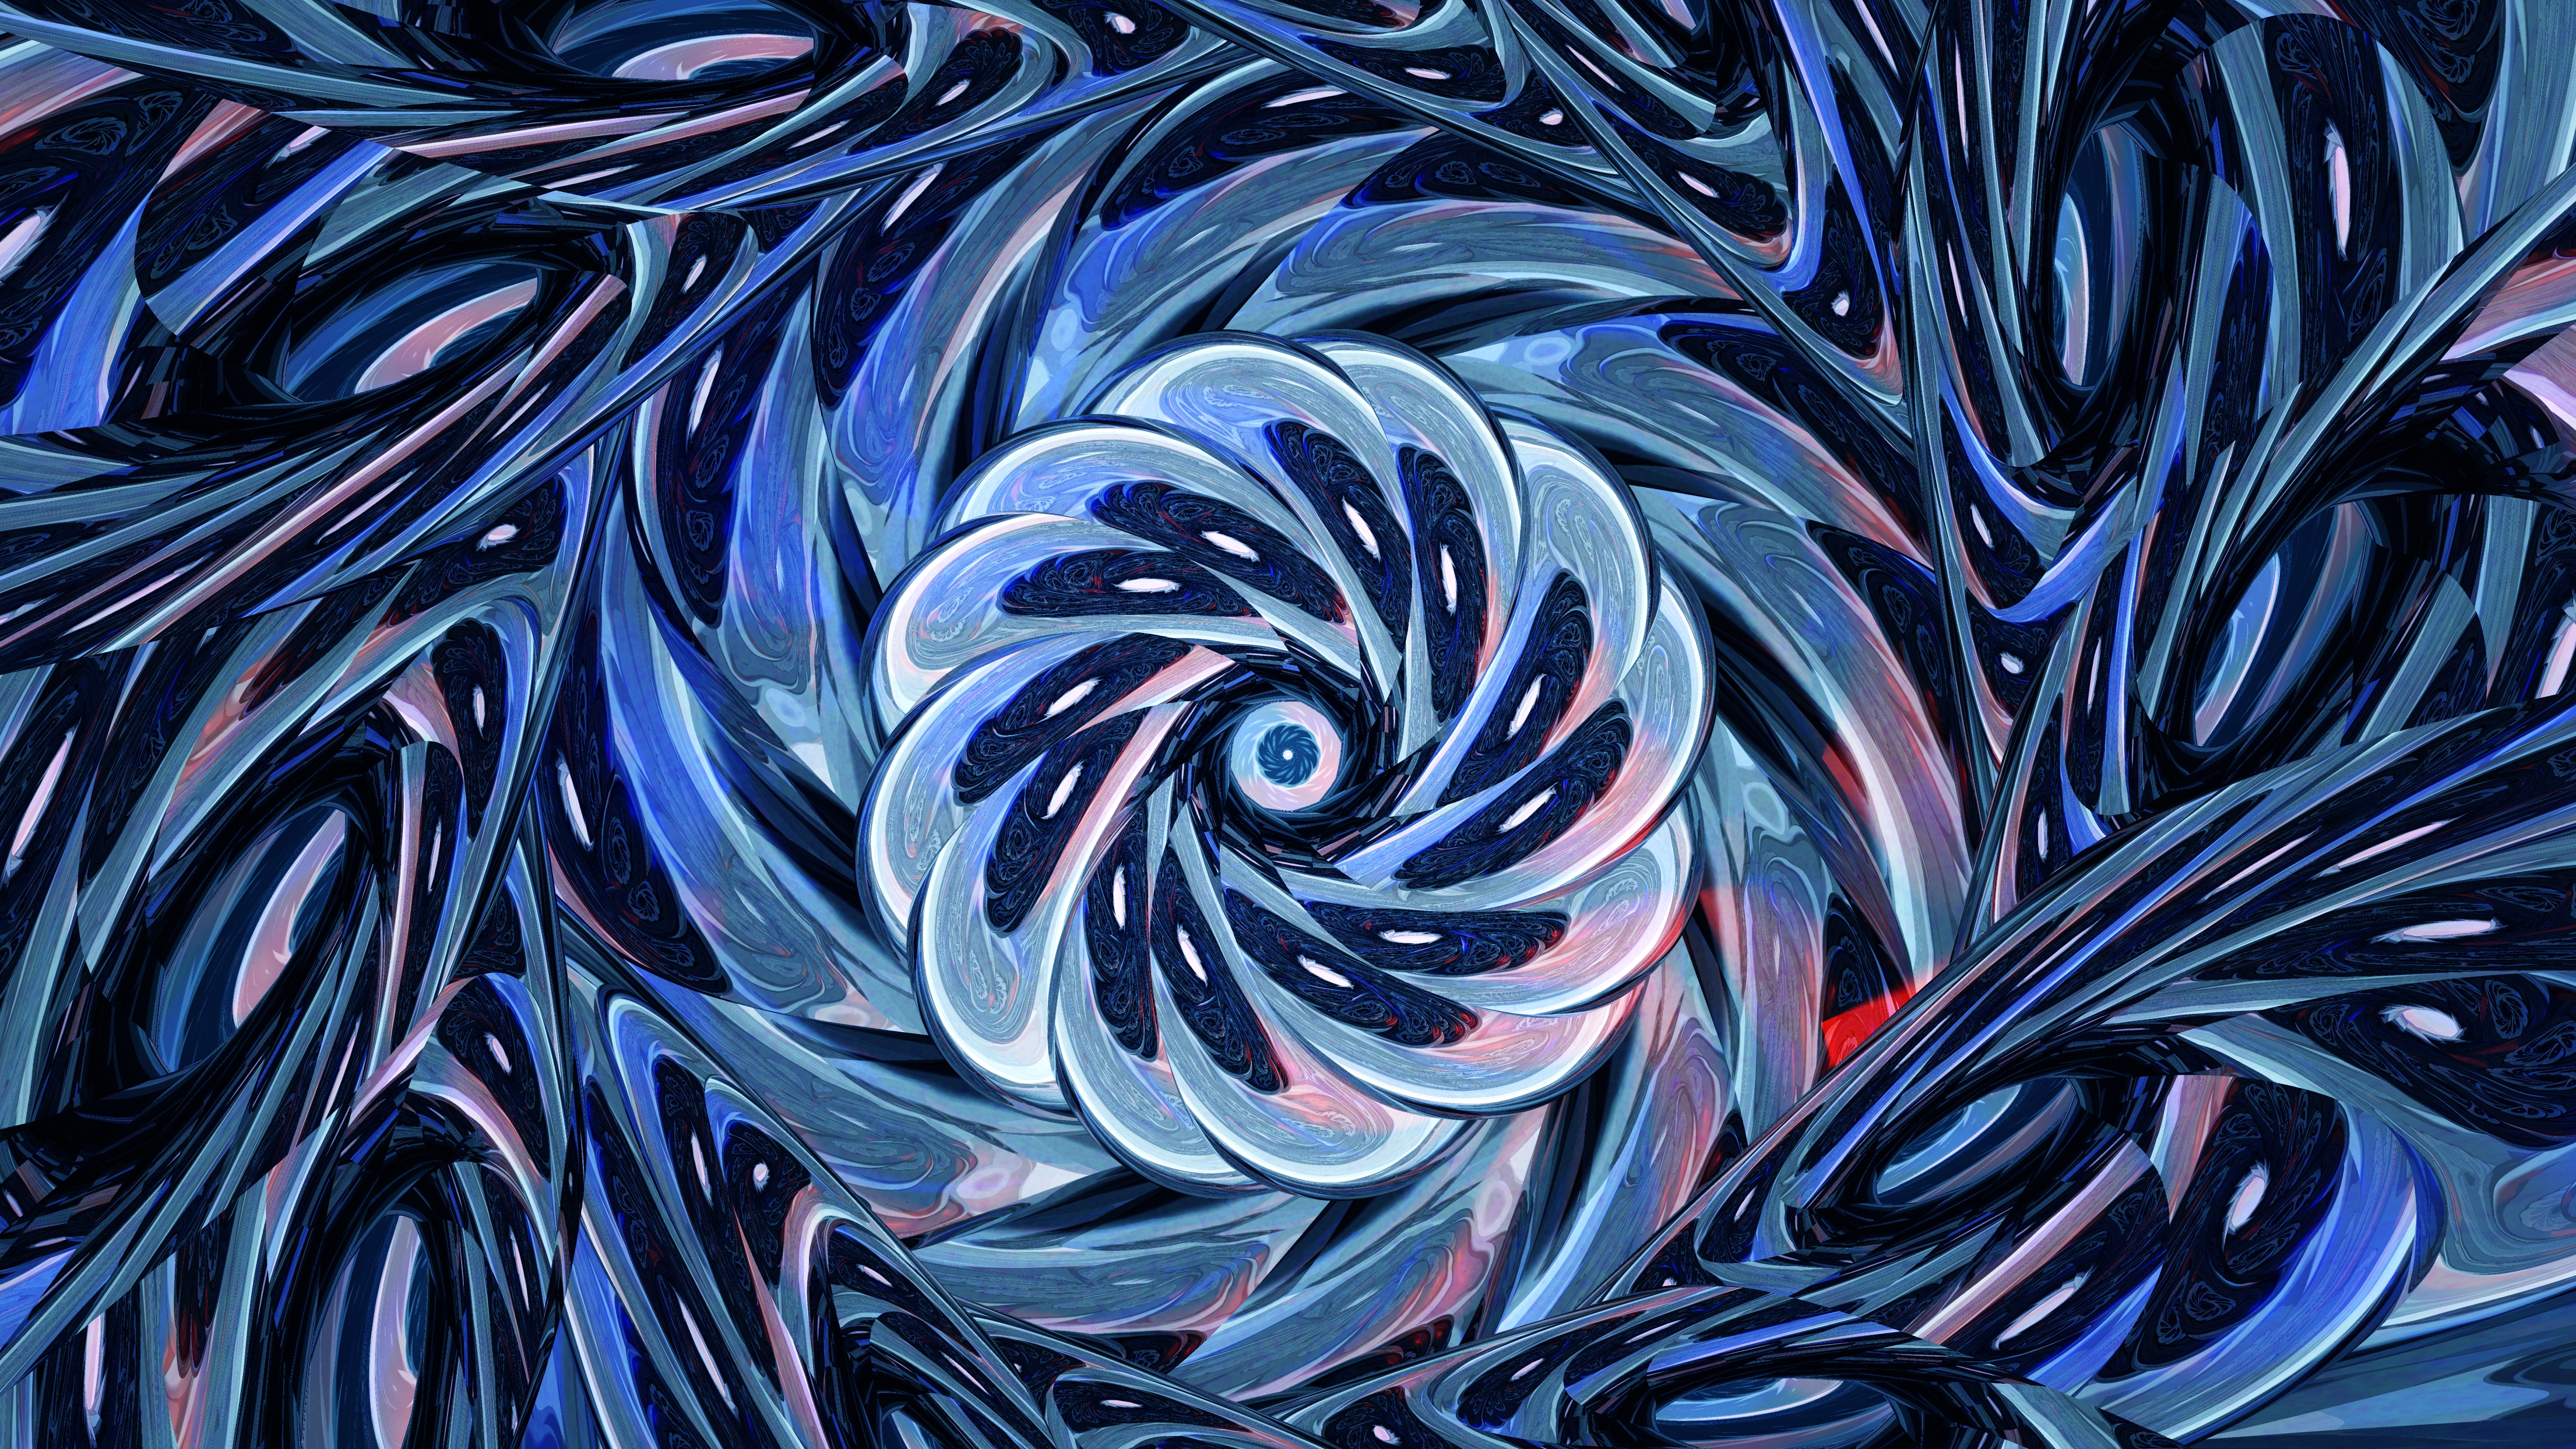 abstract, fractal, confused, intricate, swirling, involute, digital 1080p